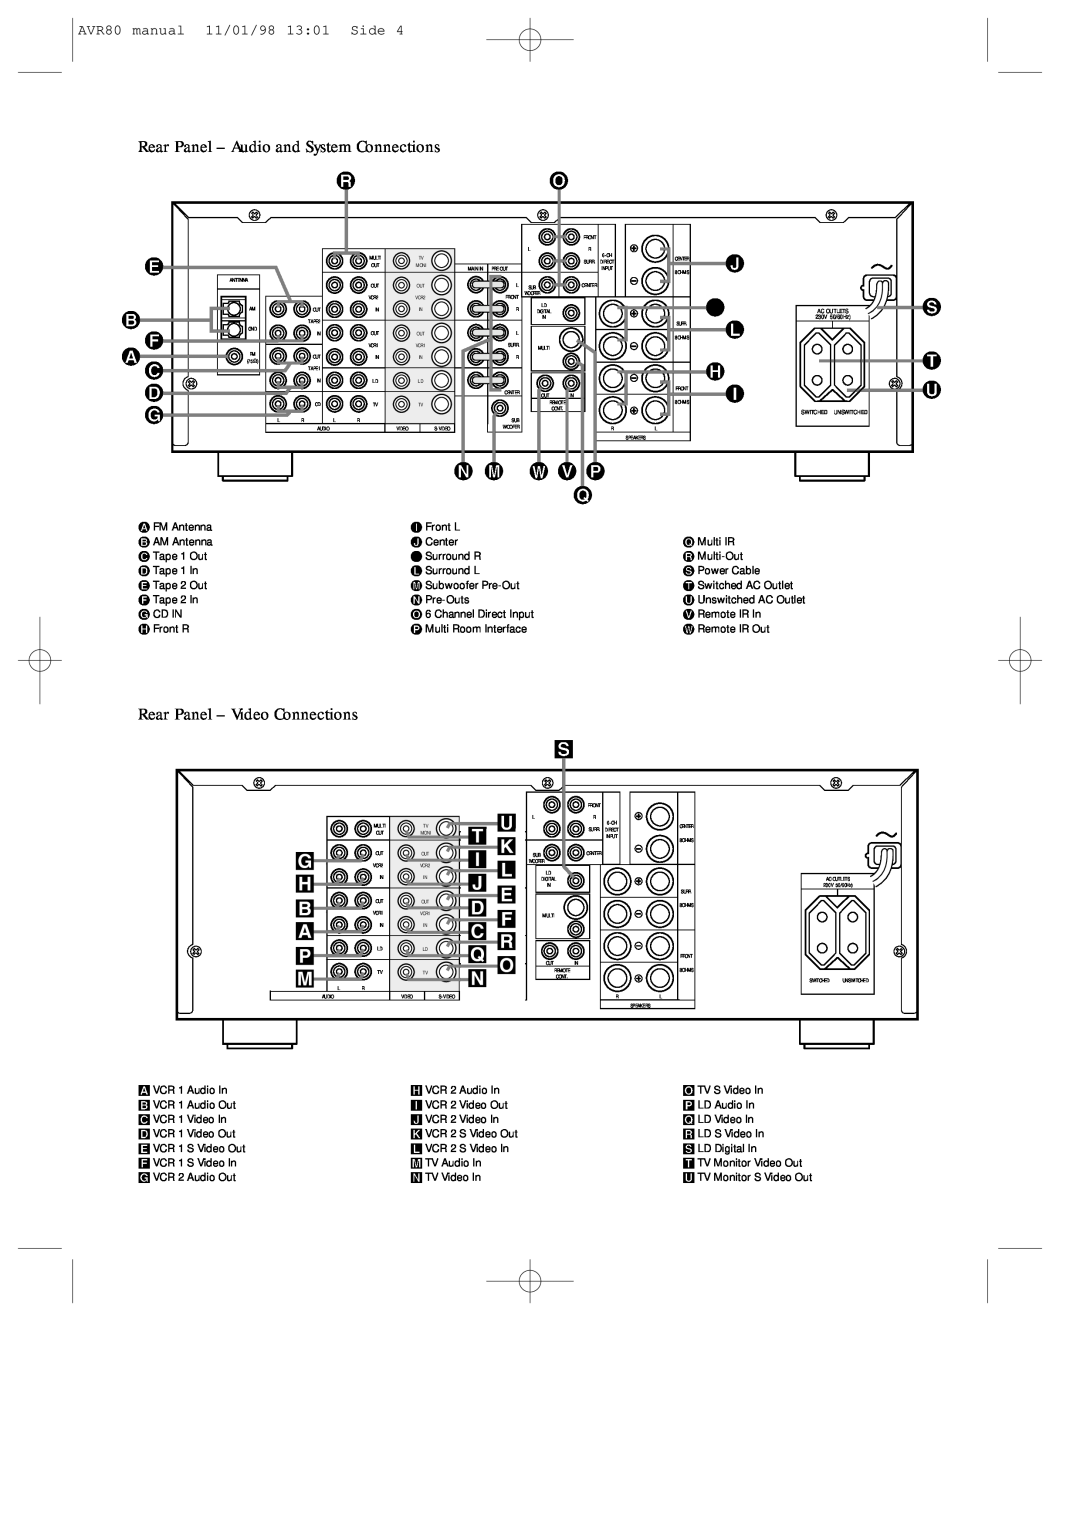 Harman-Kardon AVR80 owner manual Rear Panel - Audio and System Connections, Rear Panel - Video Connections, · Ã ¹, P Cd 